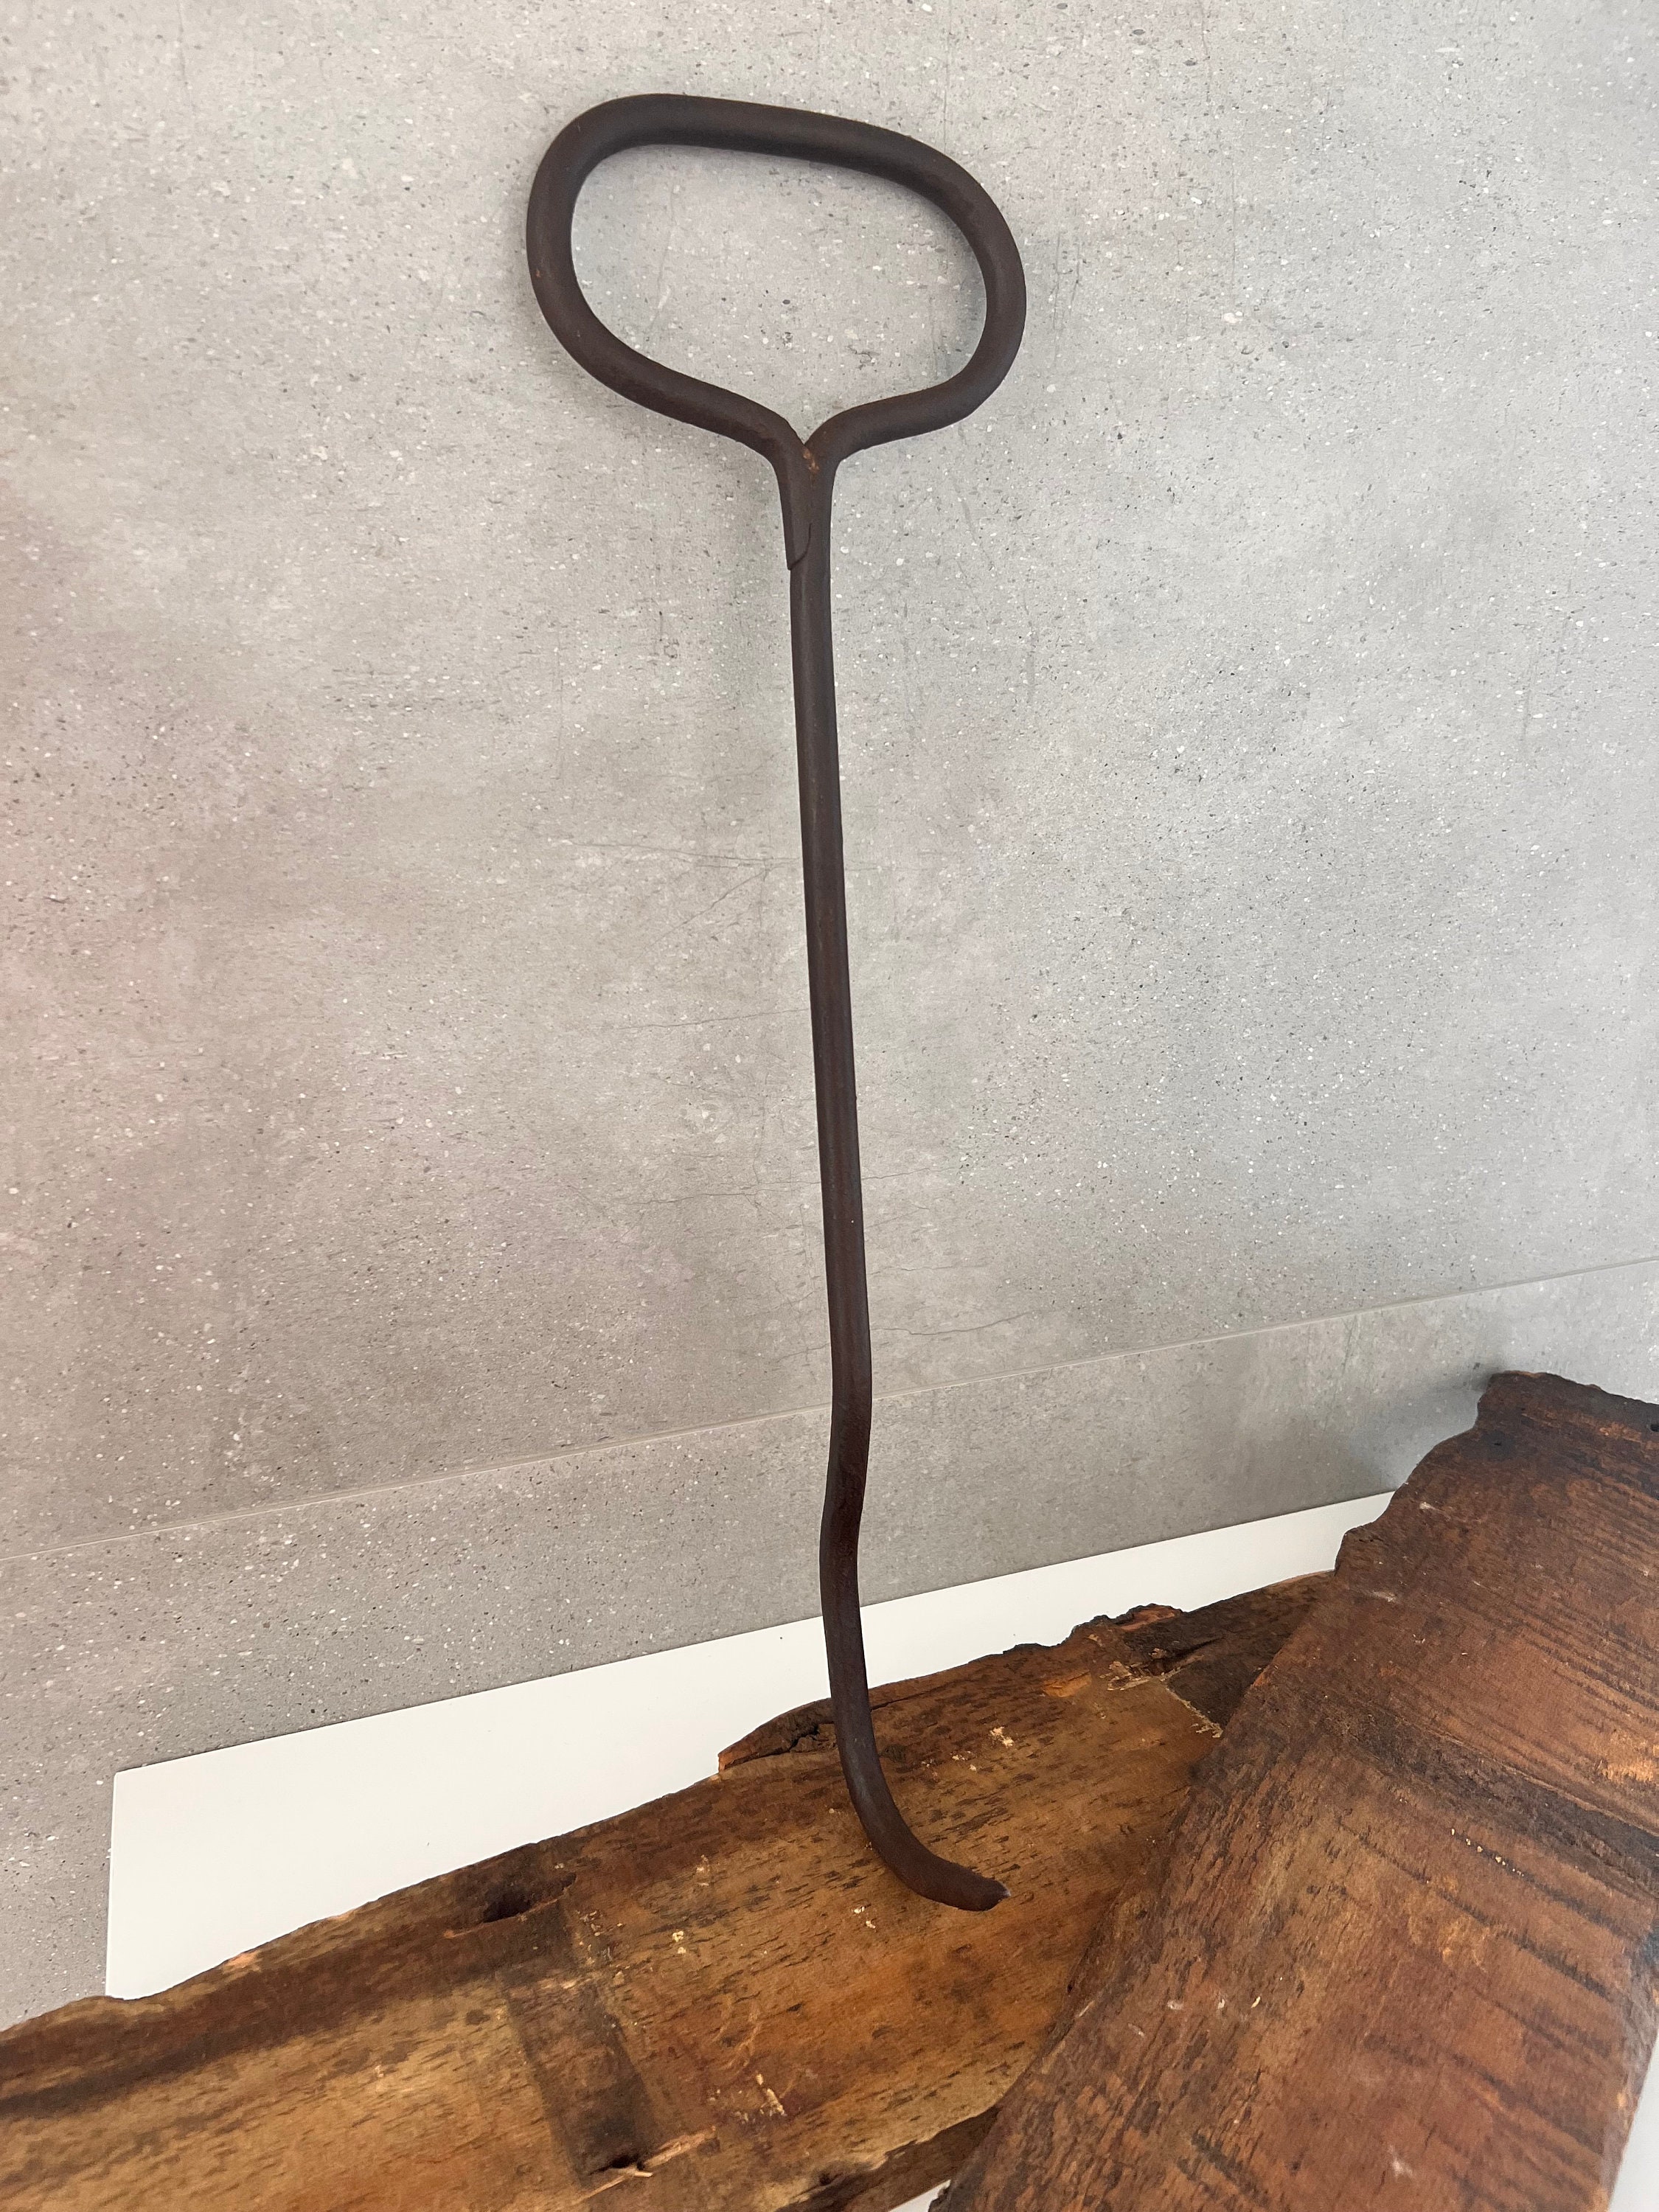 Vintage Large HAY BALE HOOK, Hand Forged Cast Iron Hay Hook